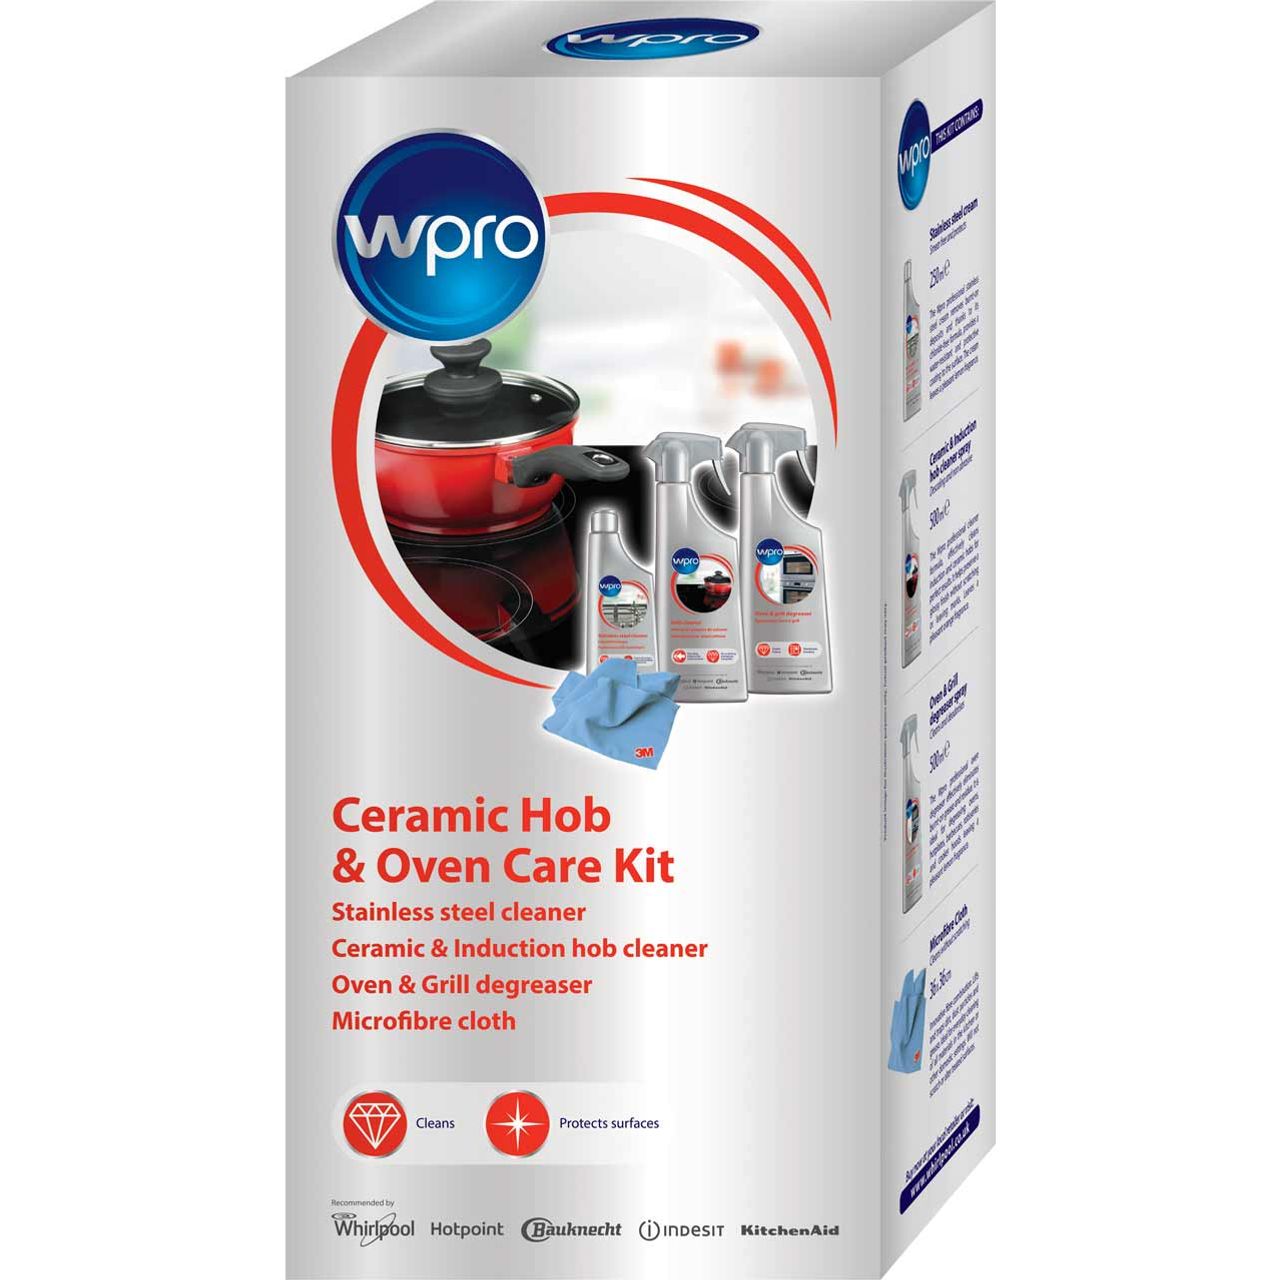 Wpro Ceramic Hob & Oven Care Pack Review